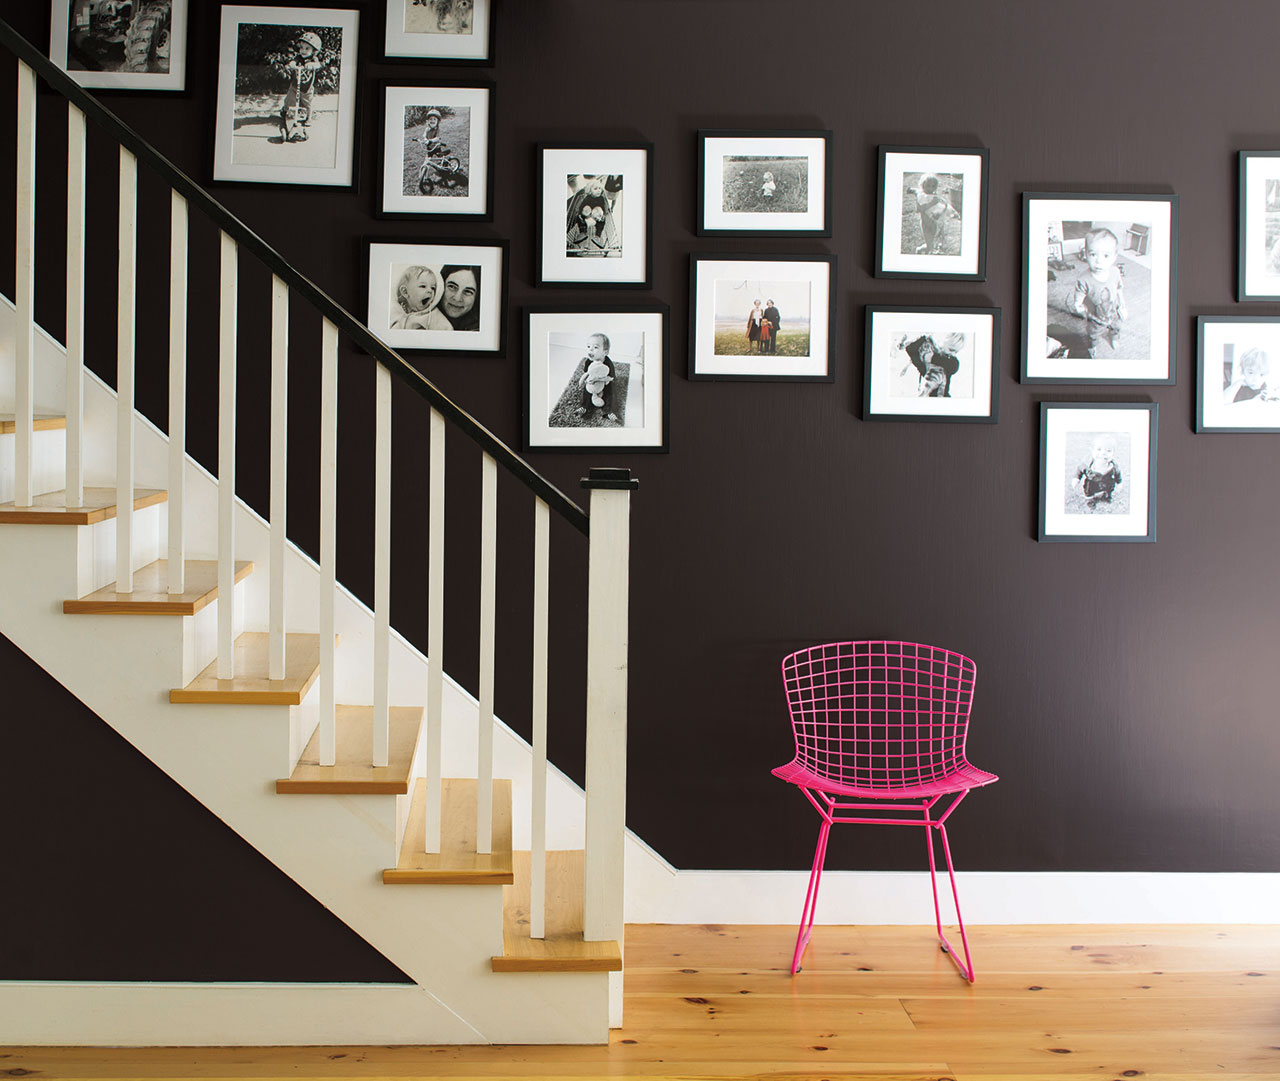 Rich purple on a staircase wall is more dynamic paired with hot pink. Black and white photographs play up the intensity.